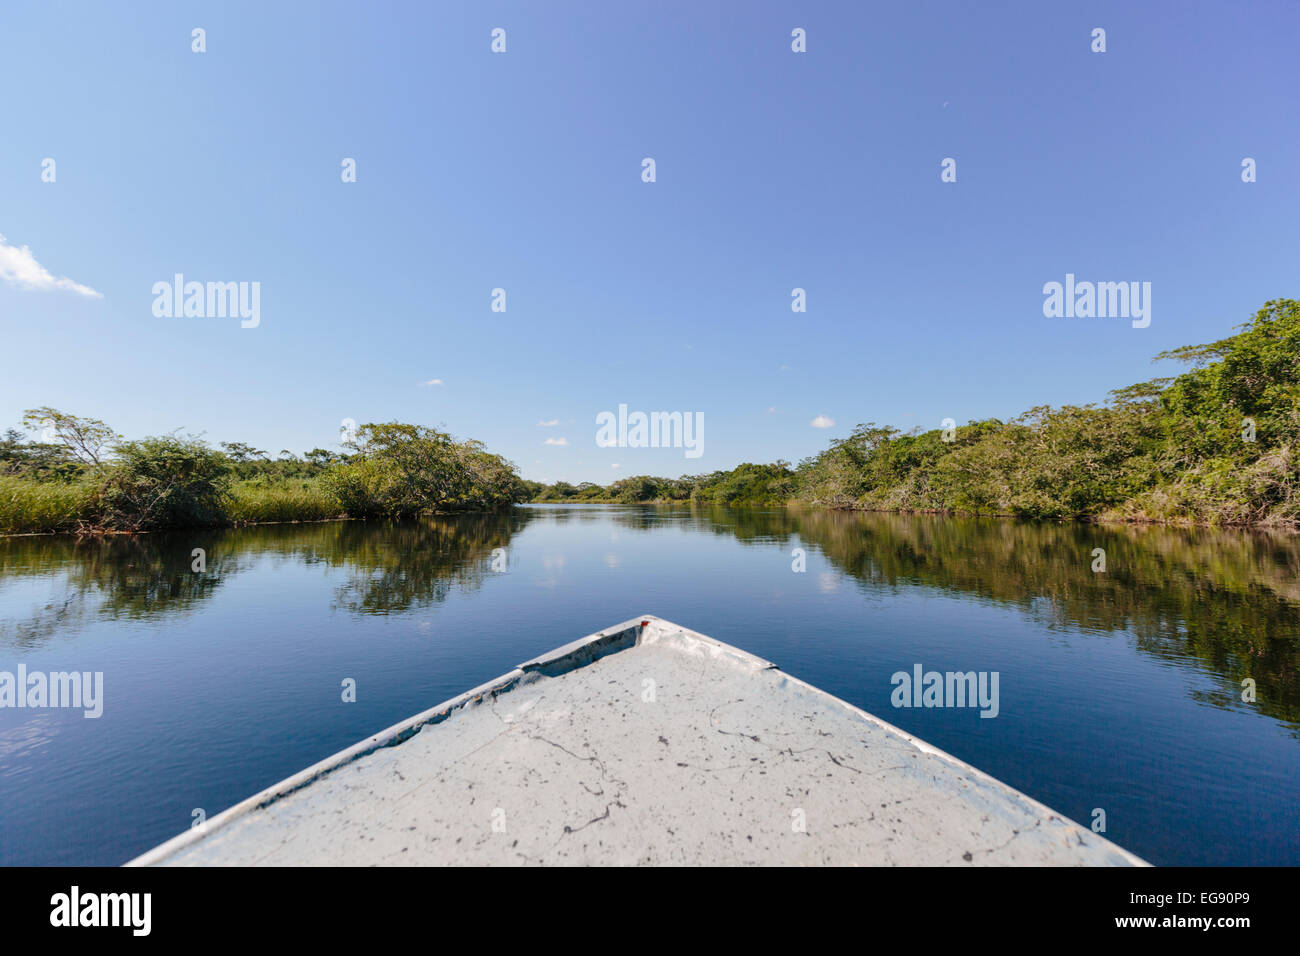 Boat ride on the New River heading to Lamanai, Belize on a sunny day Stock Photo